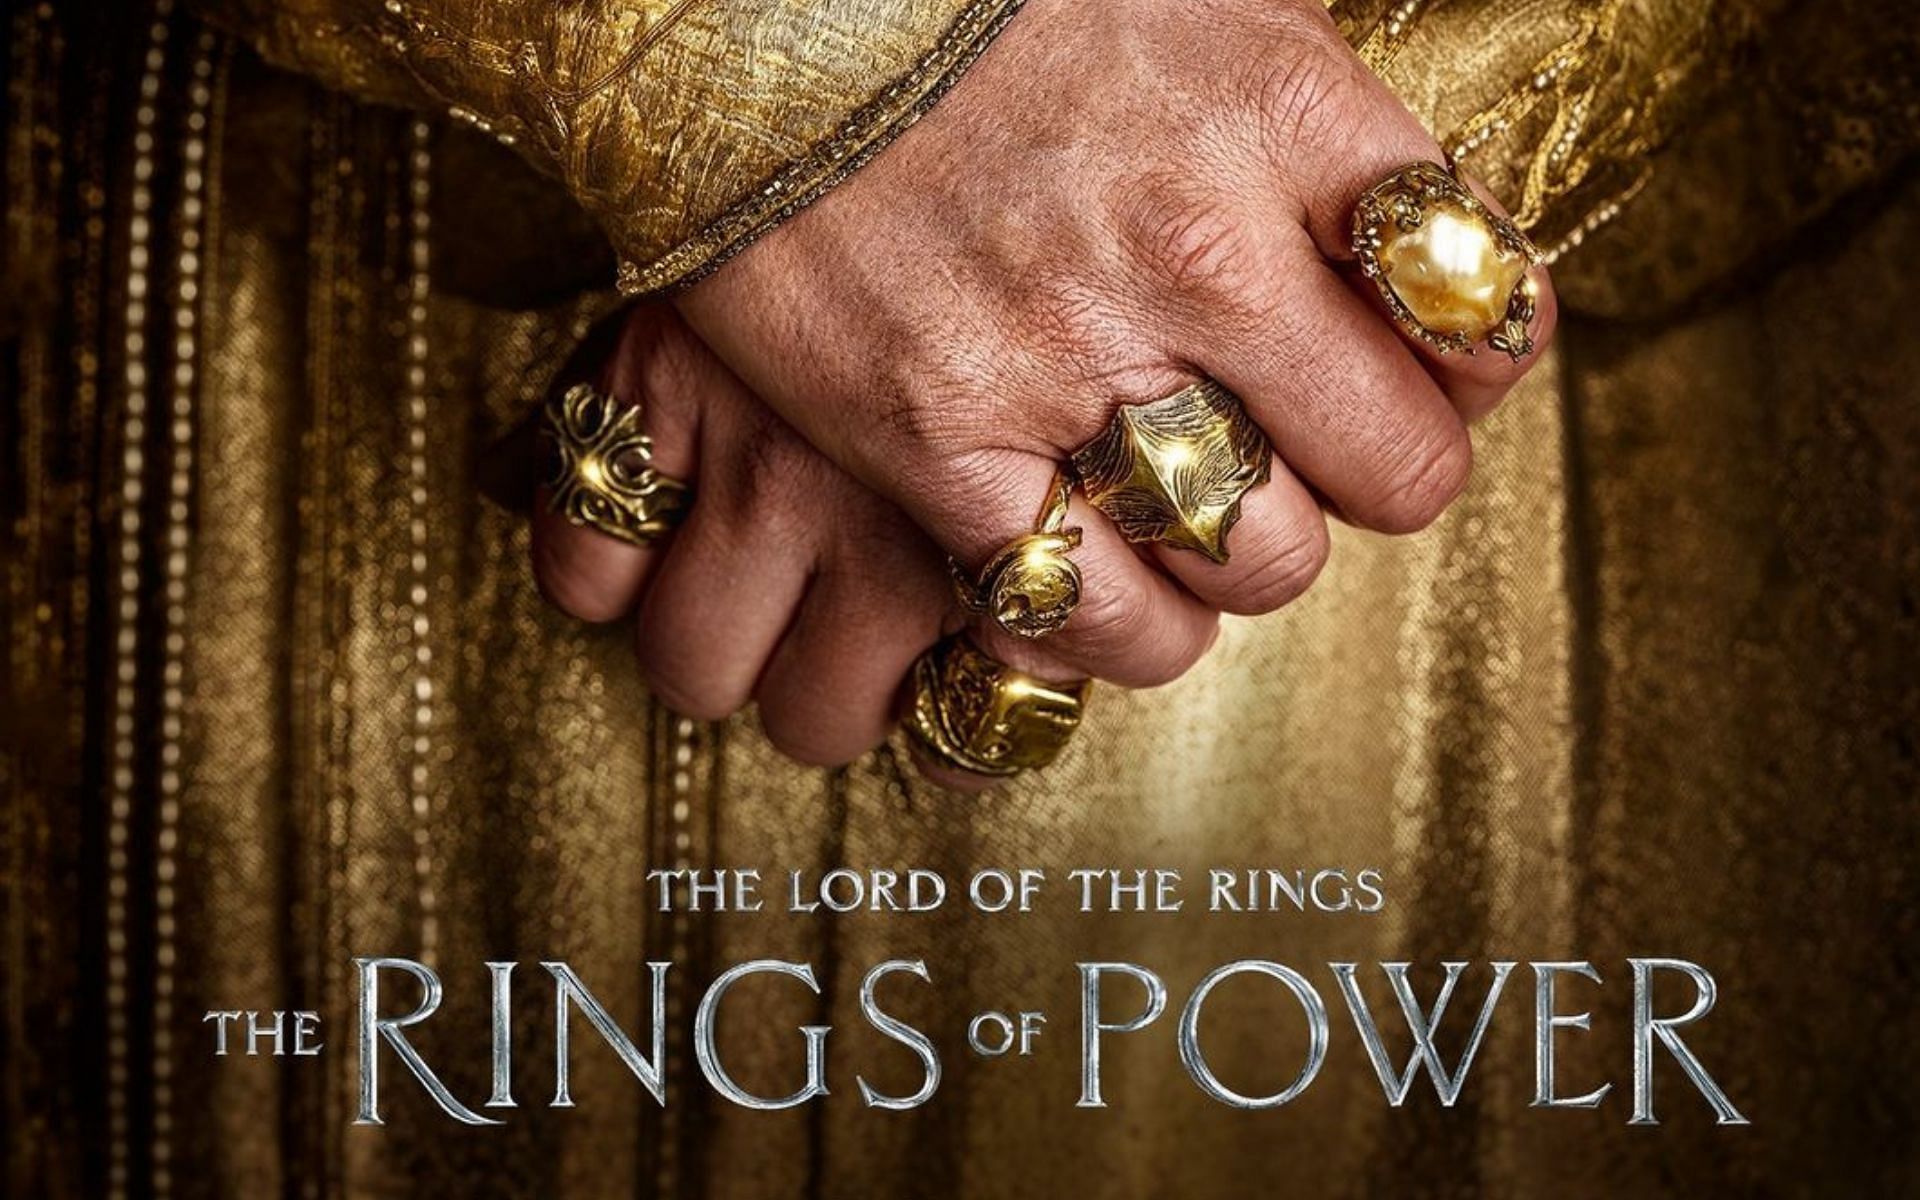 The Lord of the Rings: The Rings of Power, a fantasy drama series (Image Via lotronprime @Instagram)